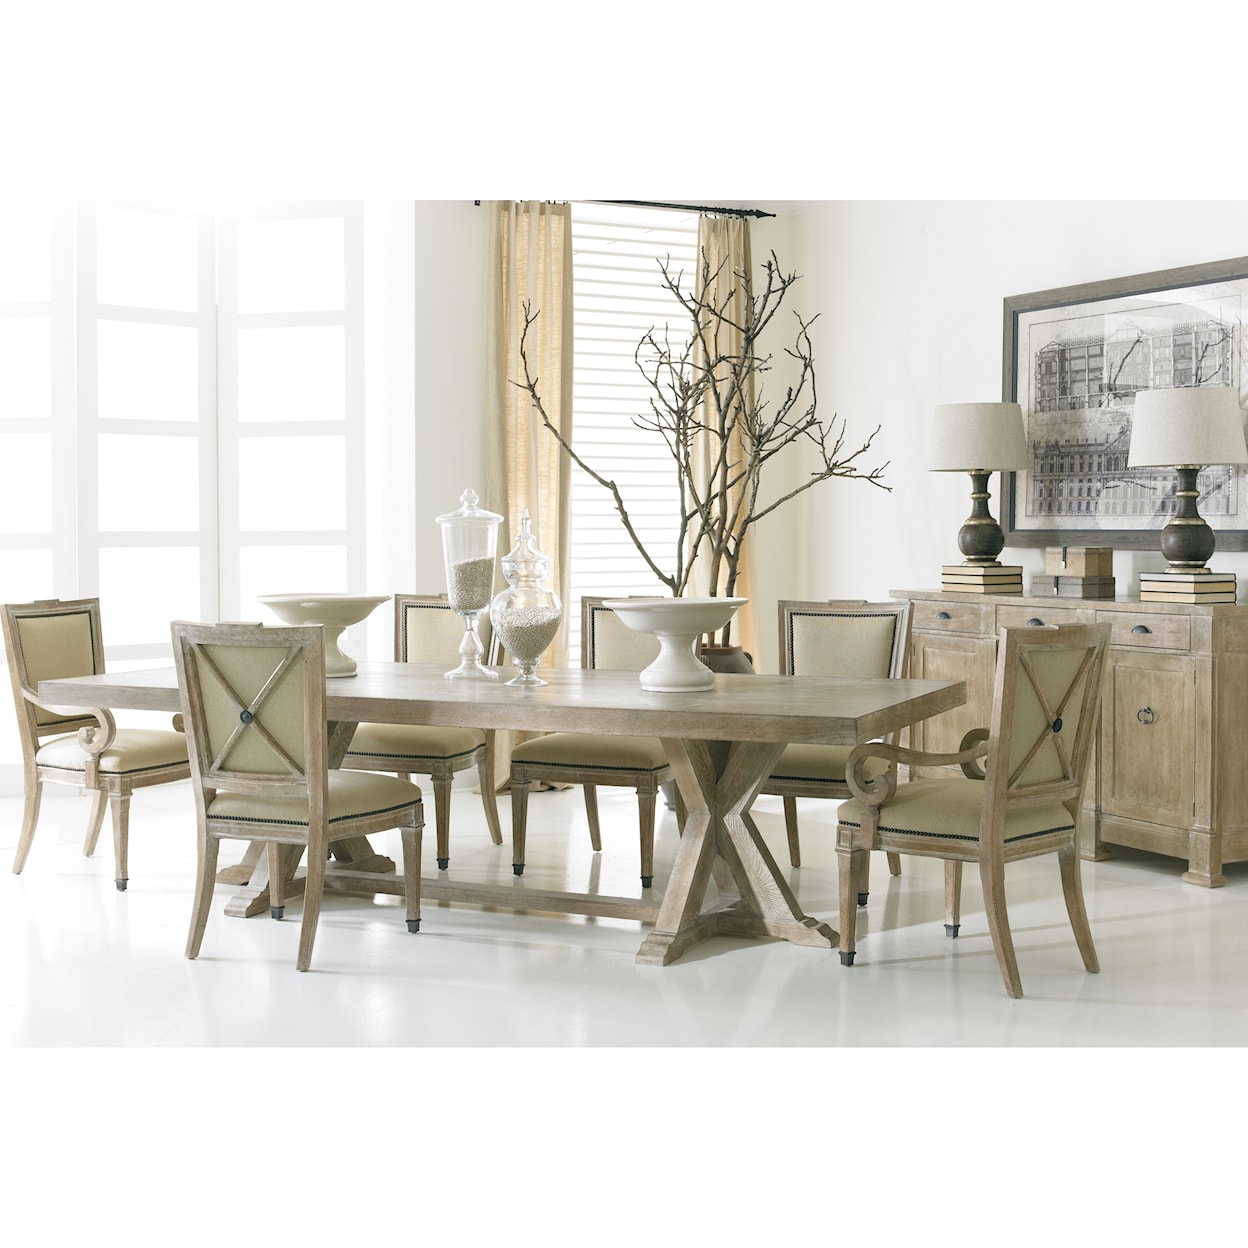 Hickory White Urban Loft Collection Dining Room Group